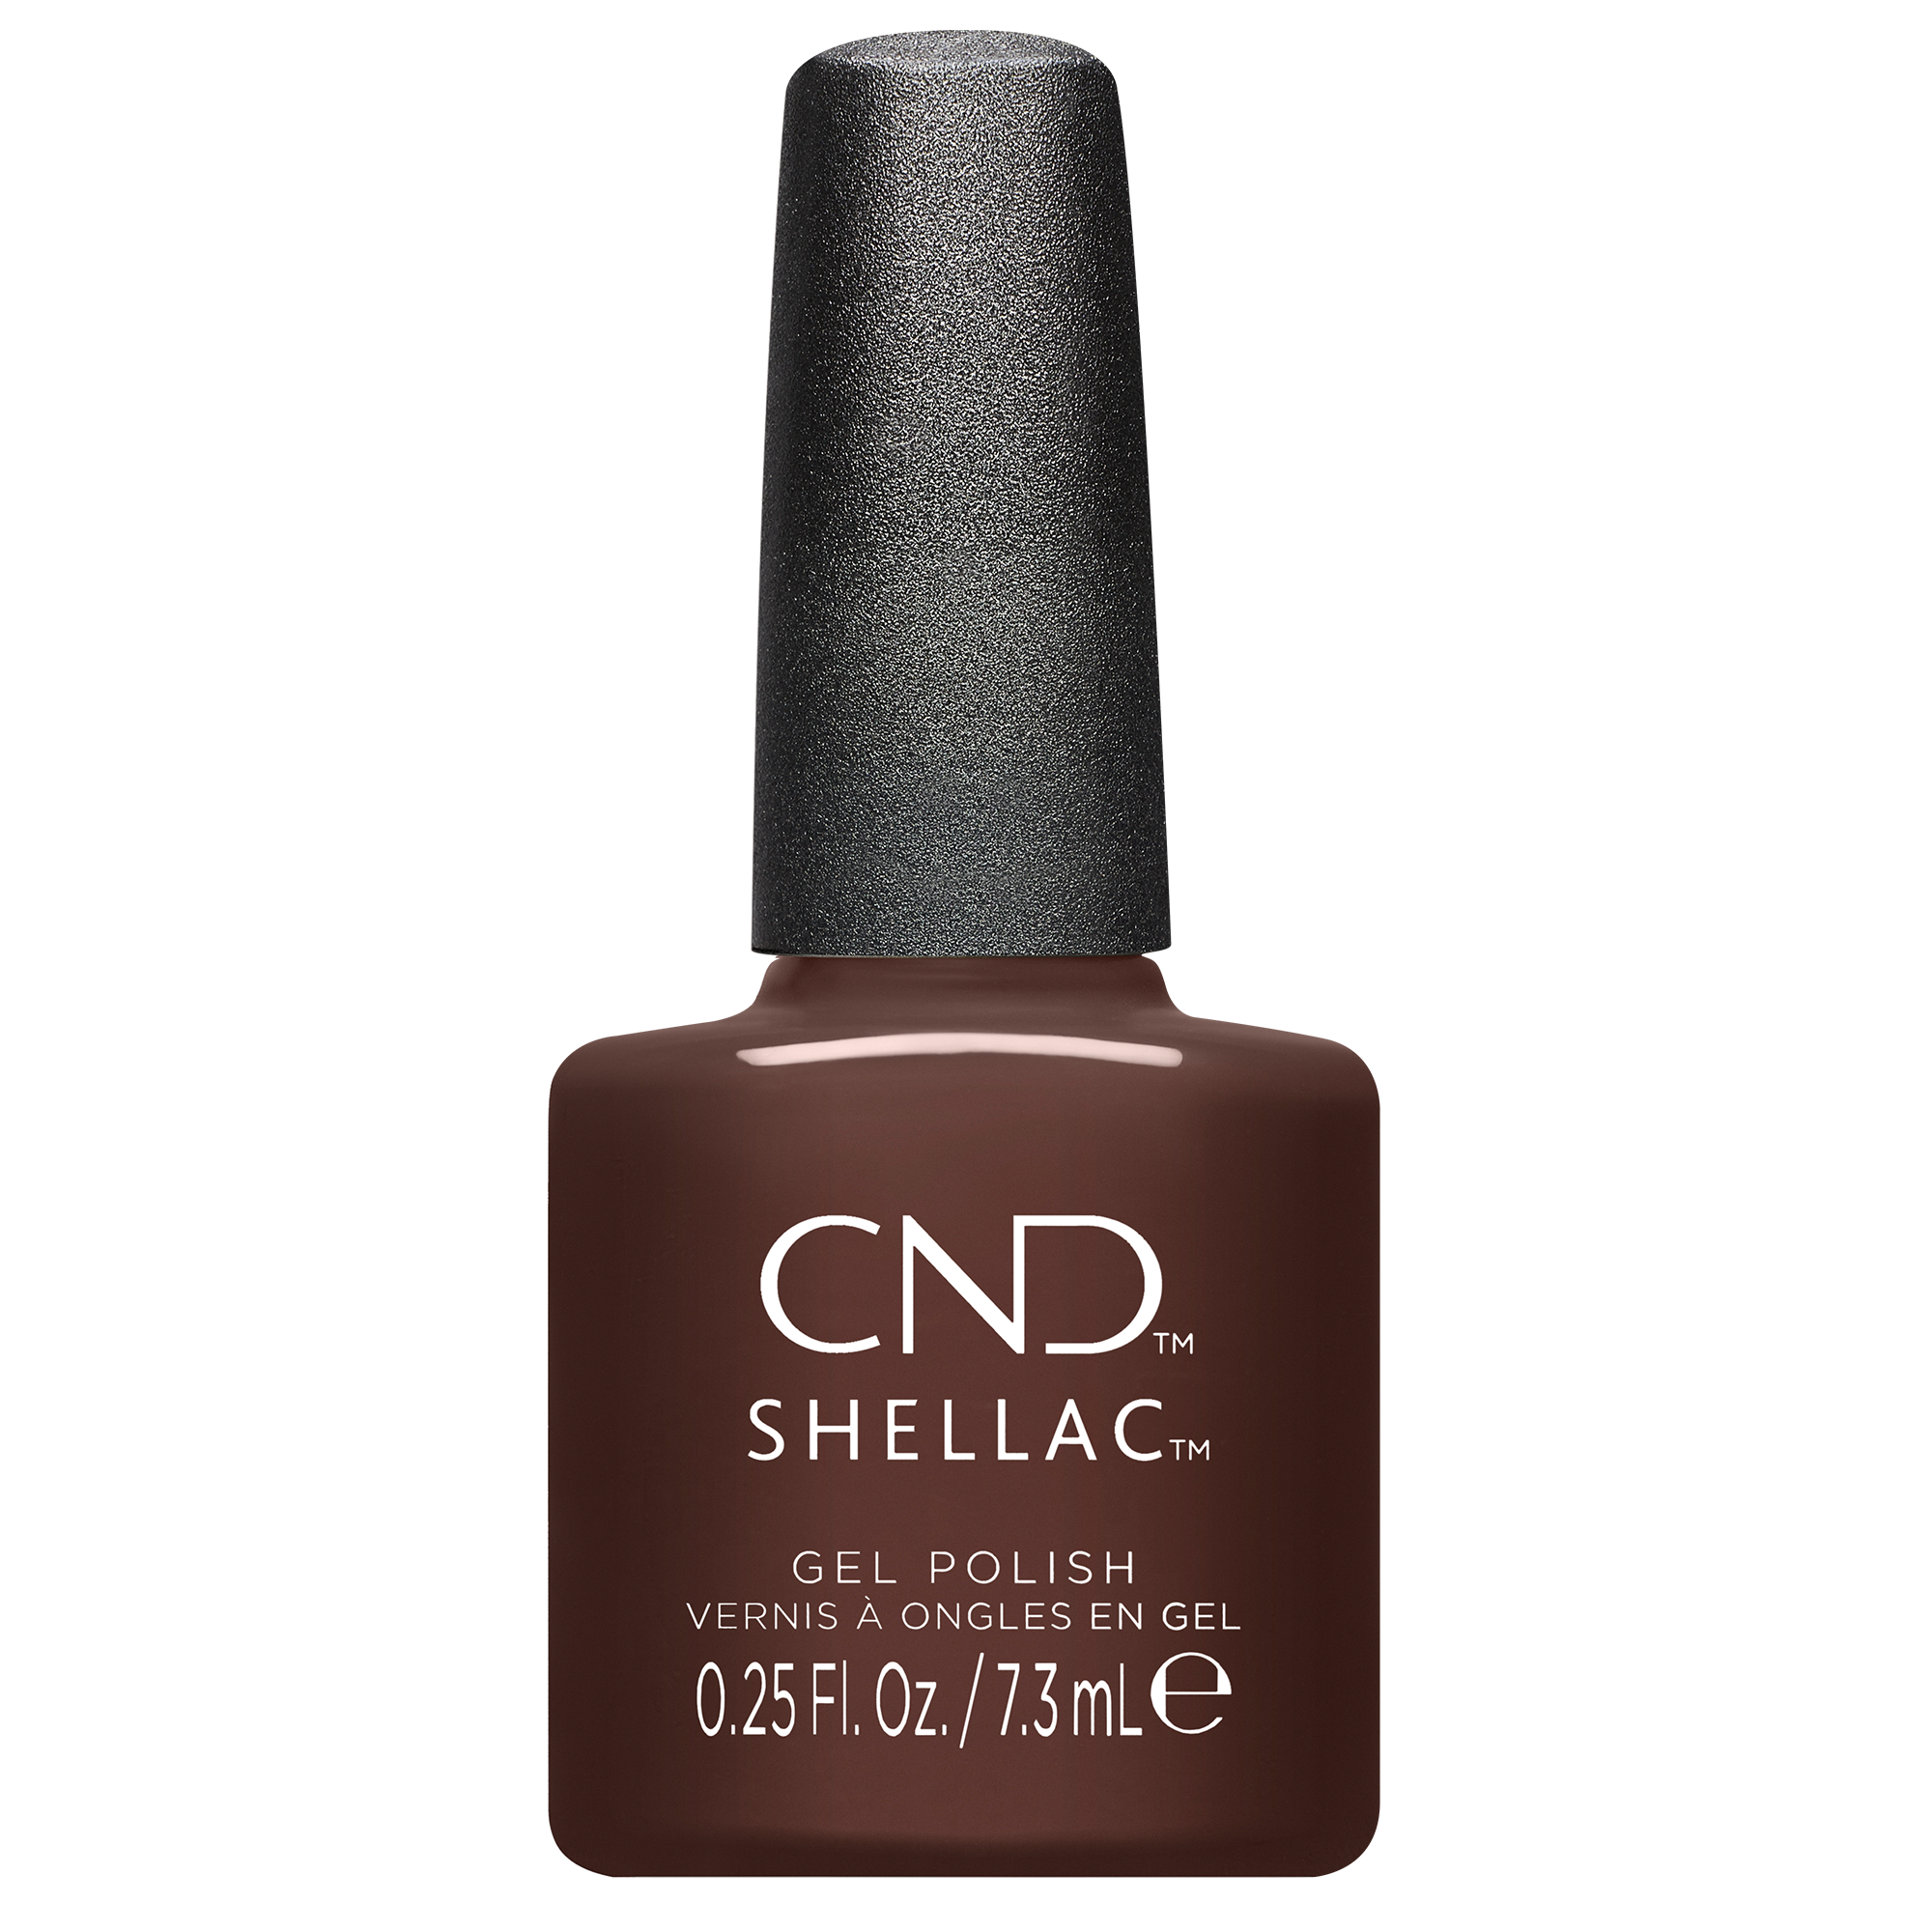 CND Upcycle Chic Fall 2023